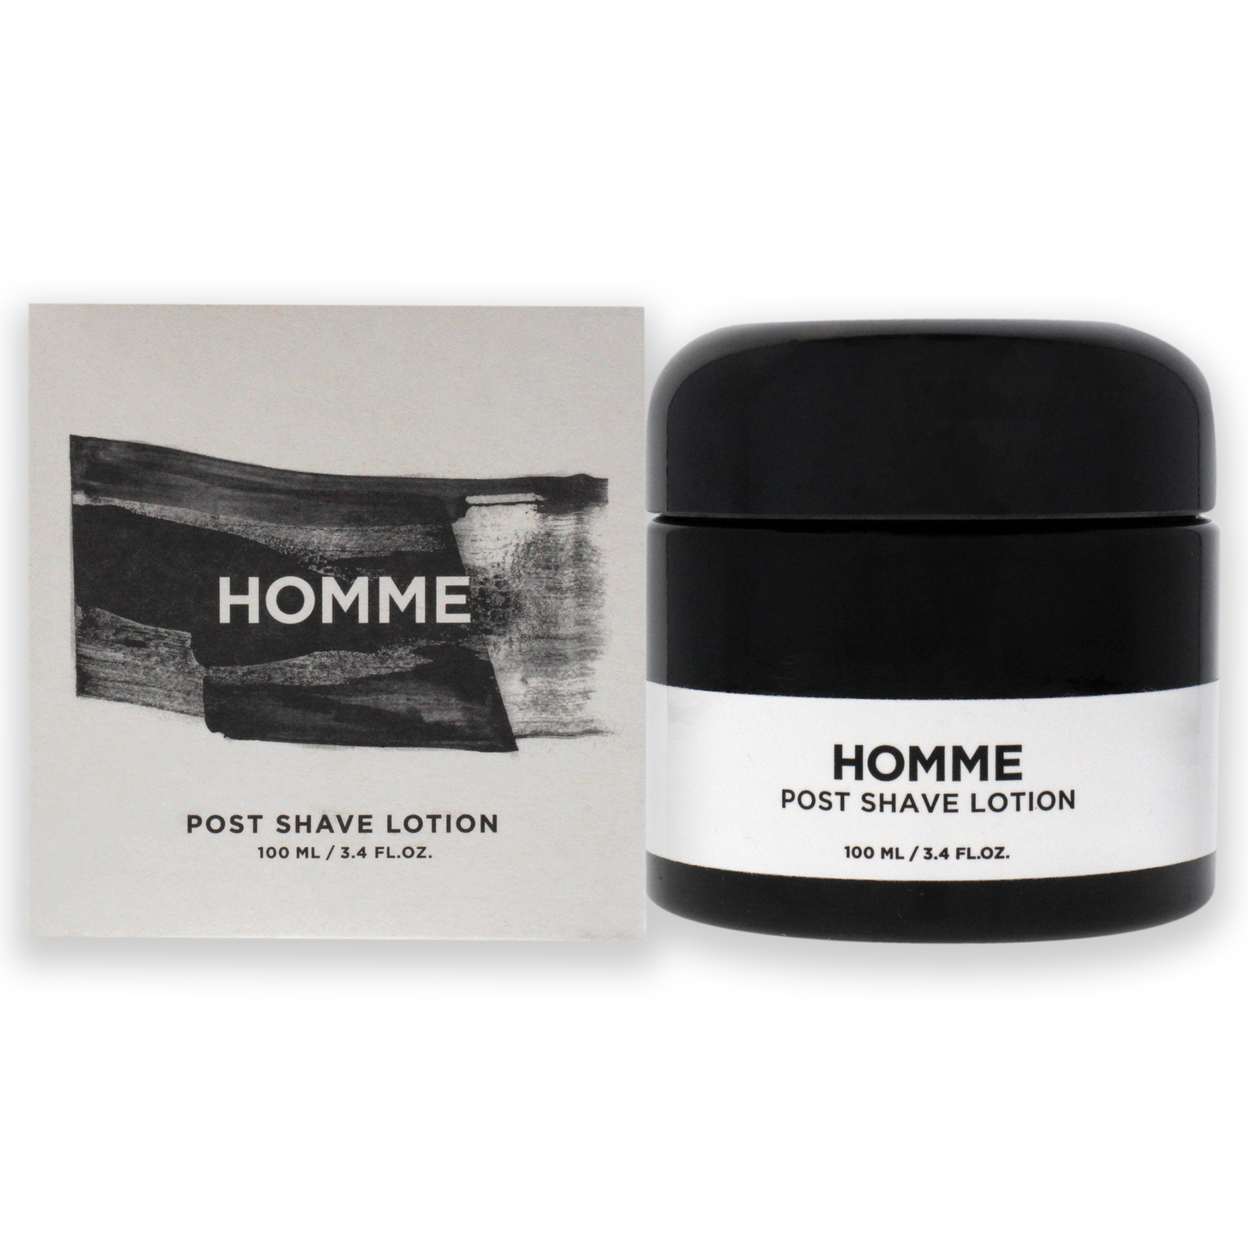 Homme Post Shave Lotion 3.4 Oz